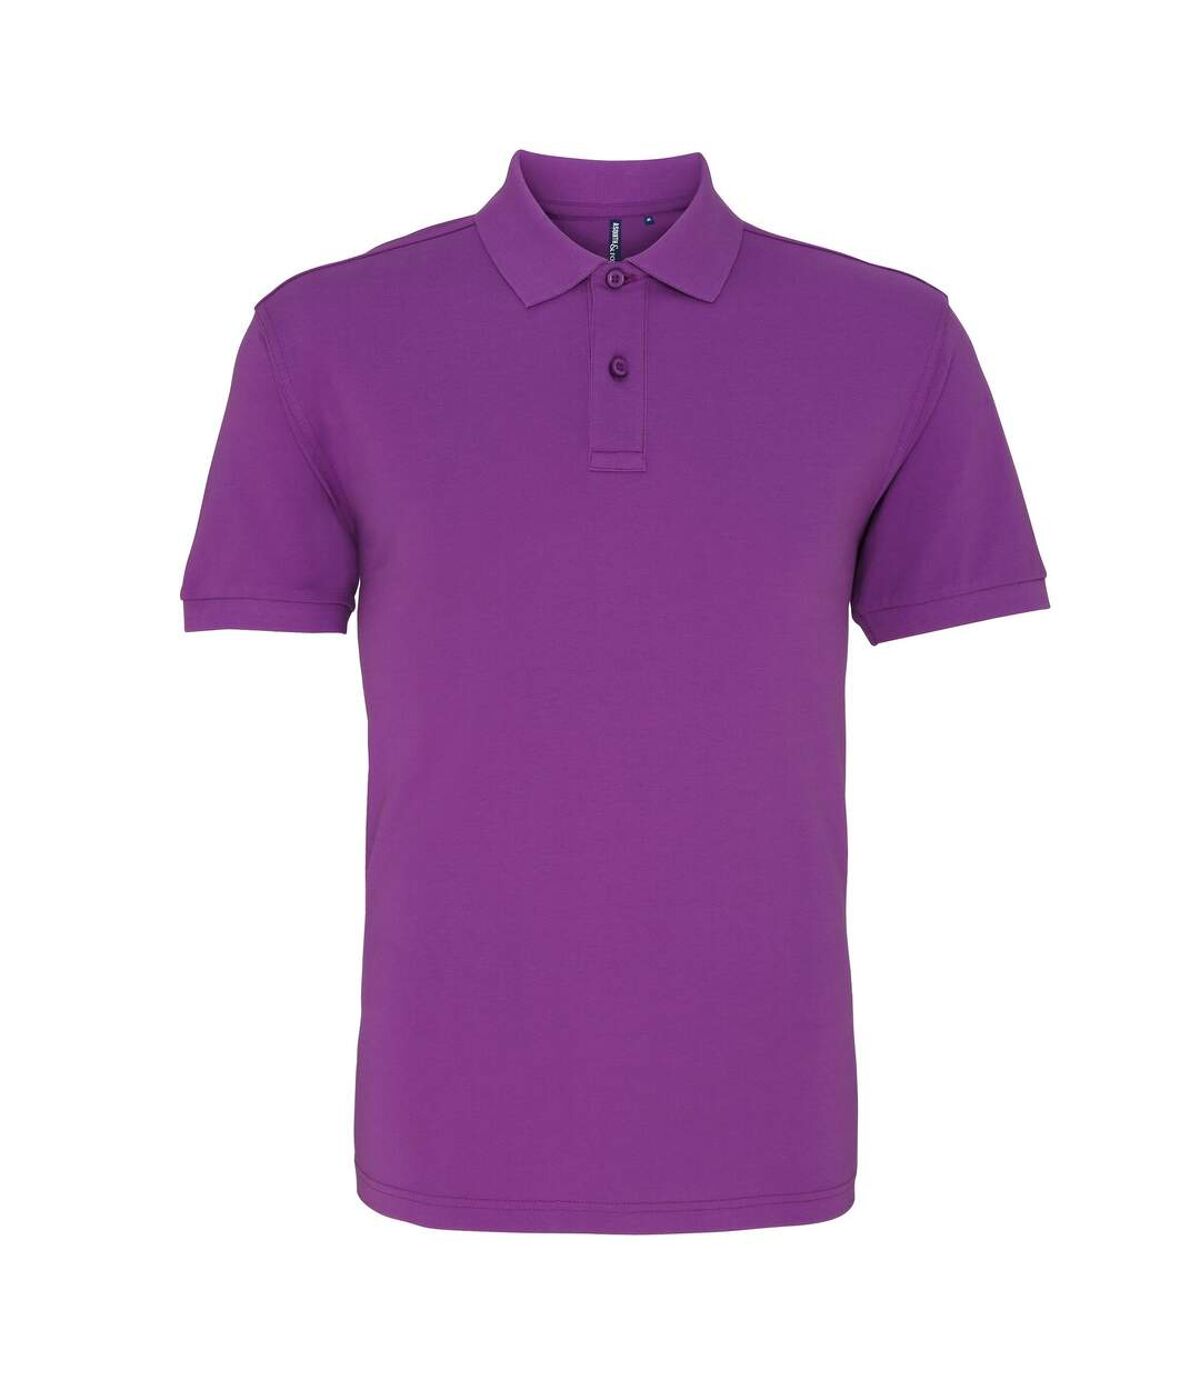 Asquith & Fox - Polo manches courtes - Homme (Violet clair) - UTRW3471